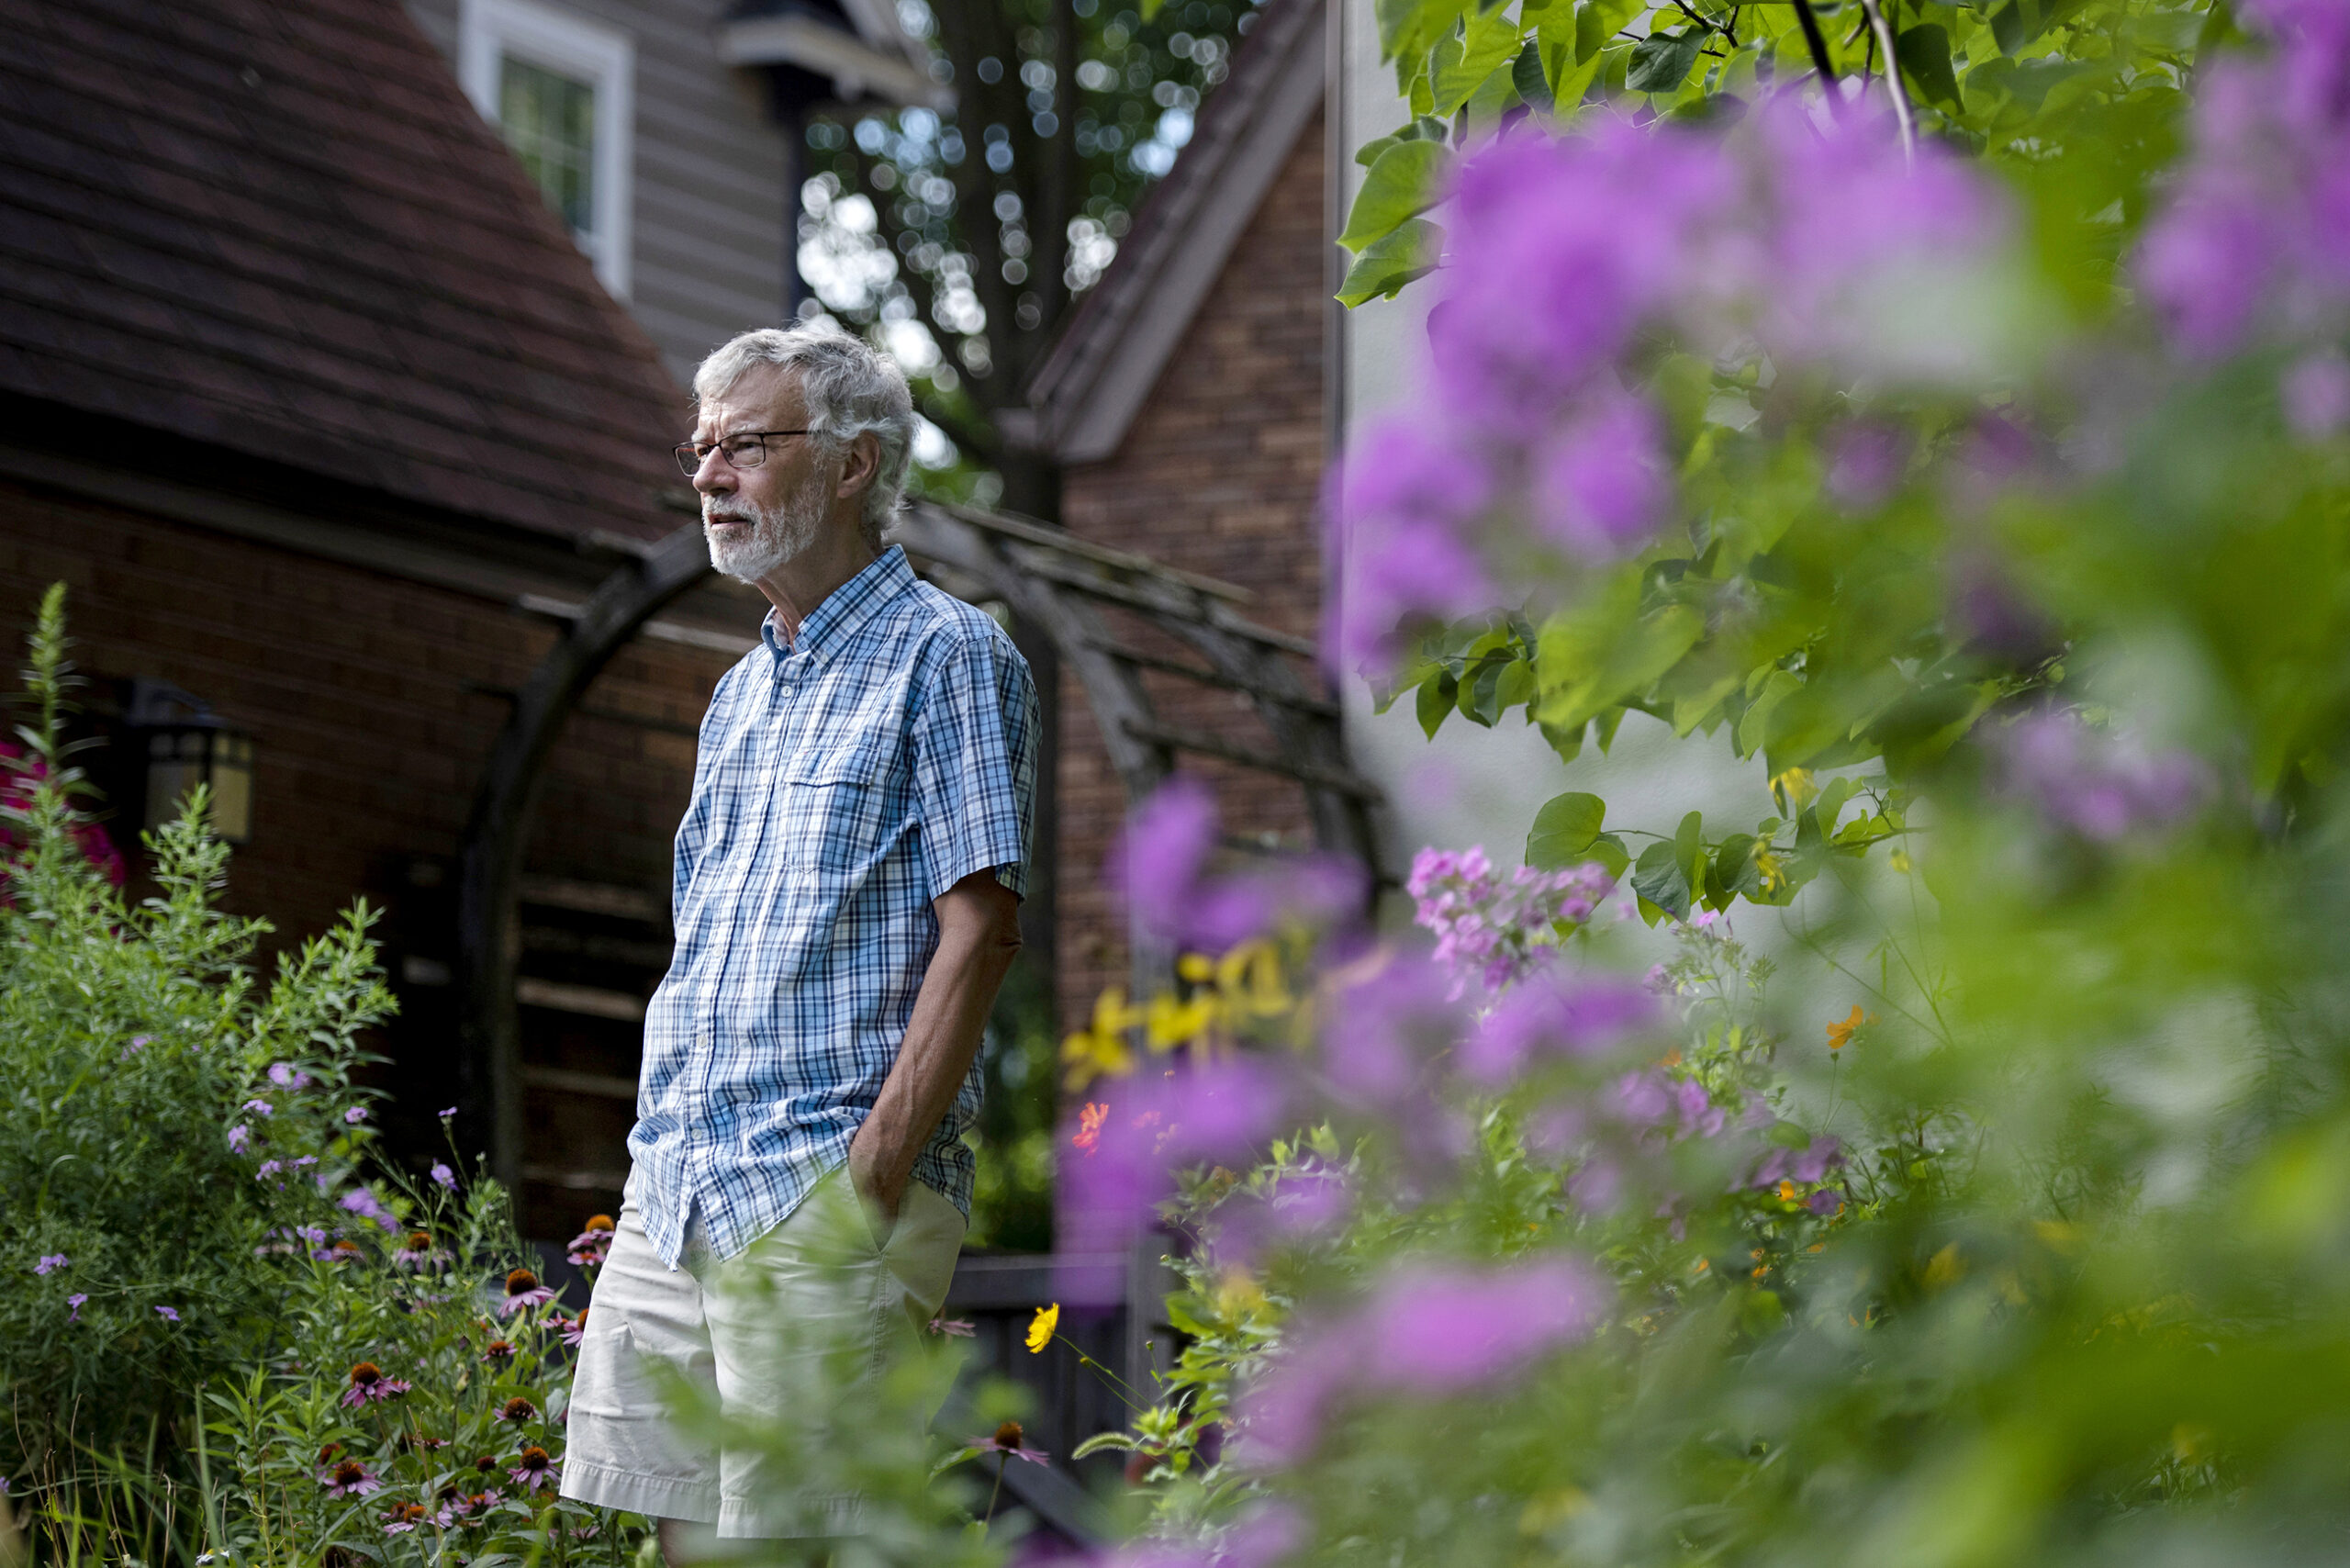 A man is surrounded by flowers in his backyard